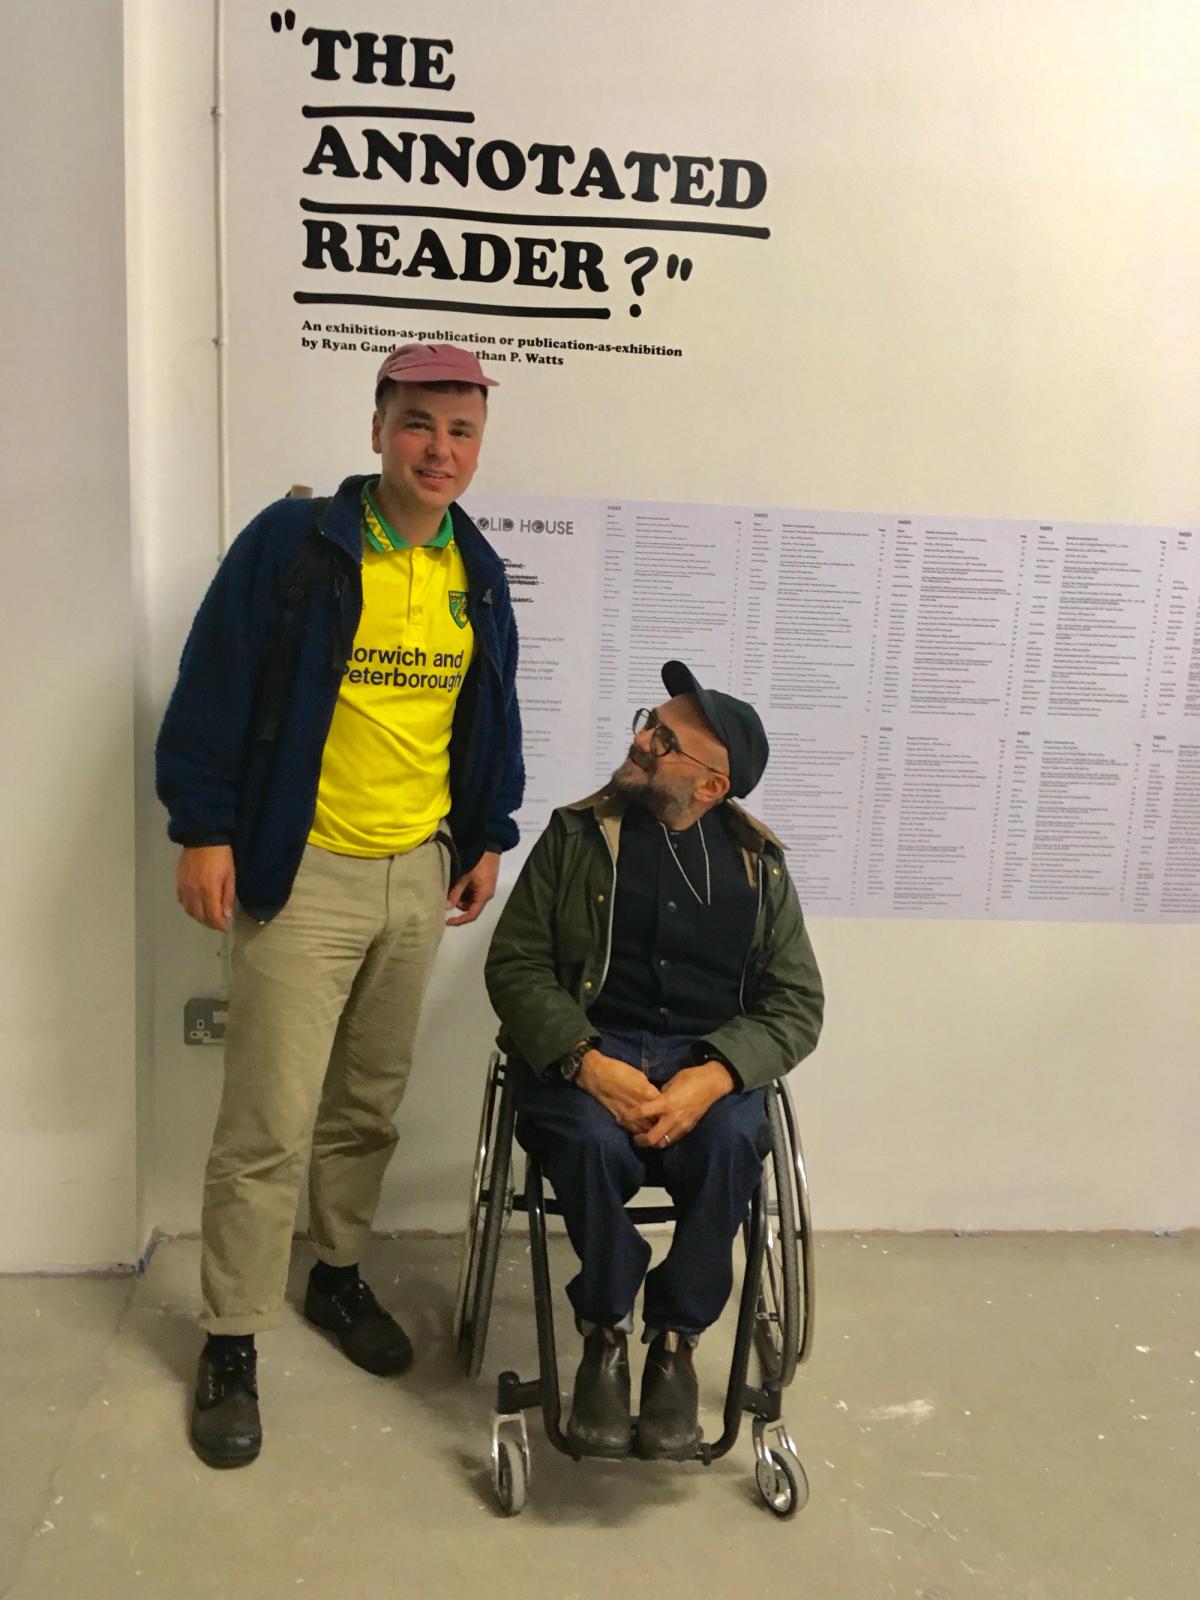 The contemporary art critic and editor Jonathan P Watts (left) and the artist Ryan Gander (right) in The Annotated Reader Photo: Louisa Buck